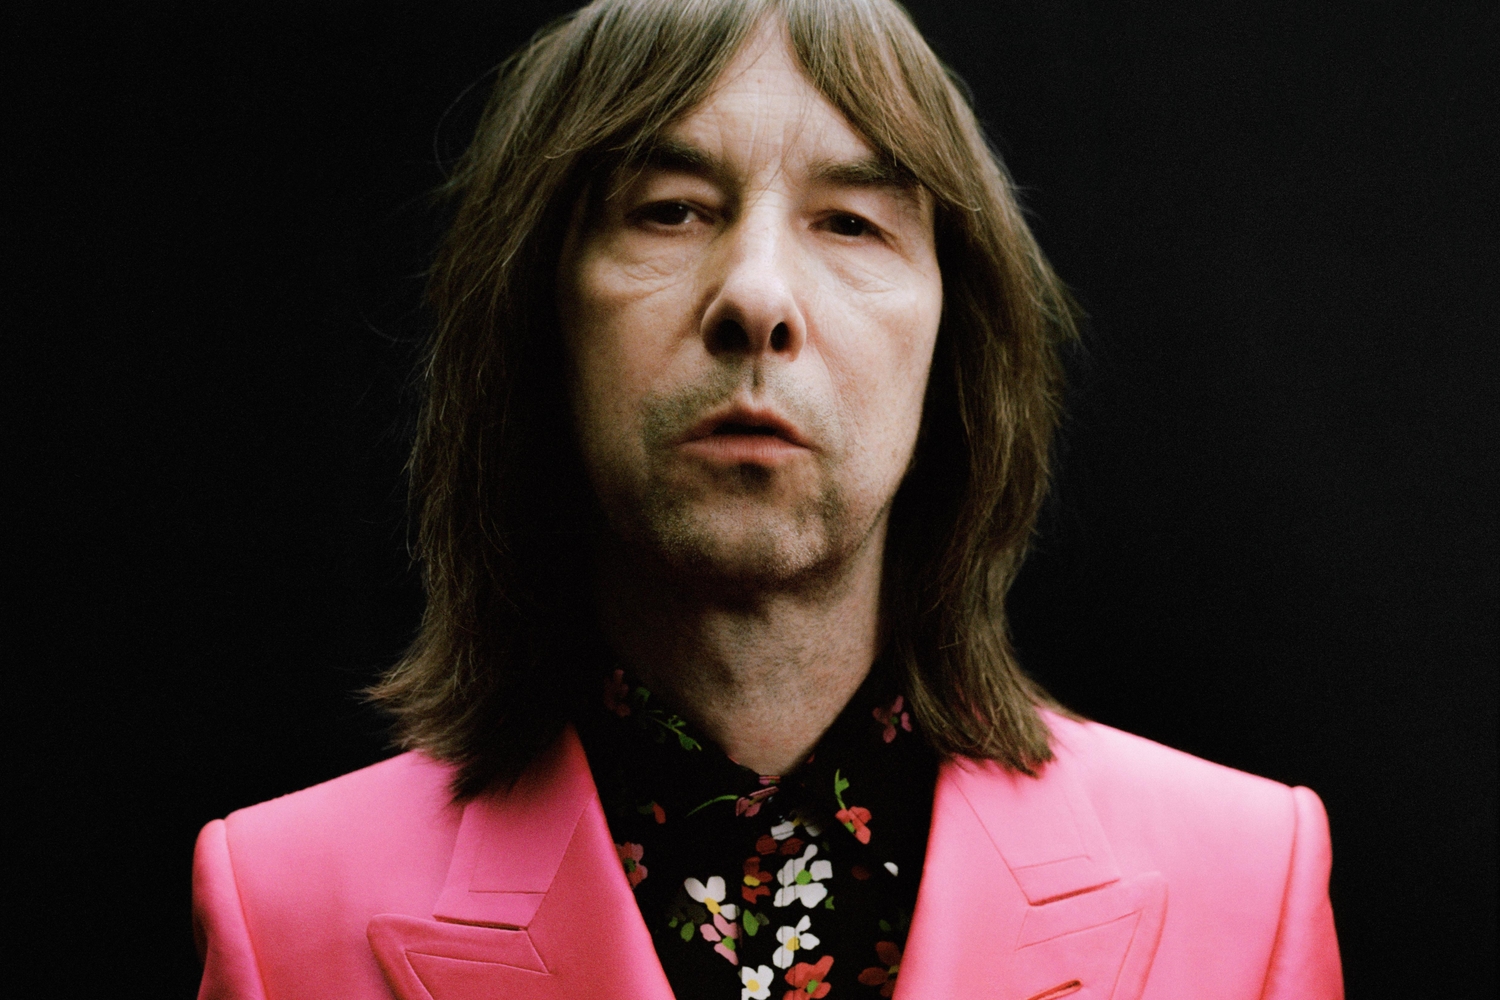 Primal Scream return with details of new album 'Come Ahead' and share latest single 'Love Insurrection'